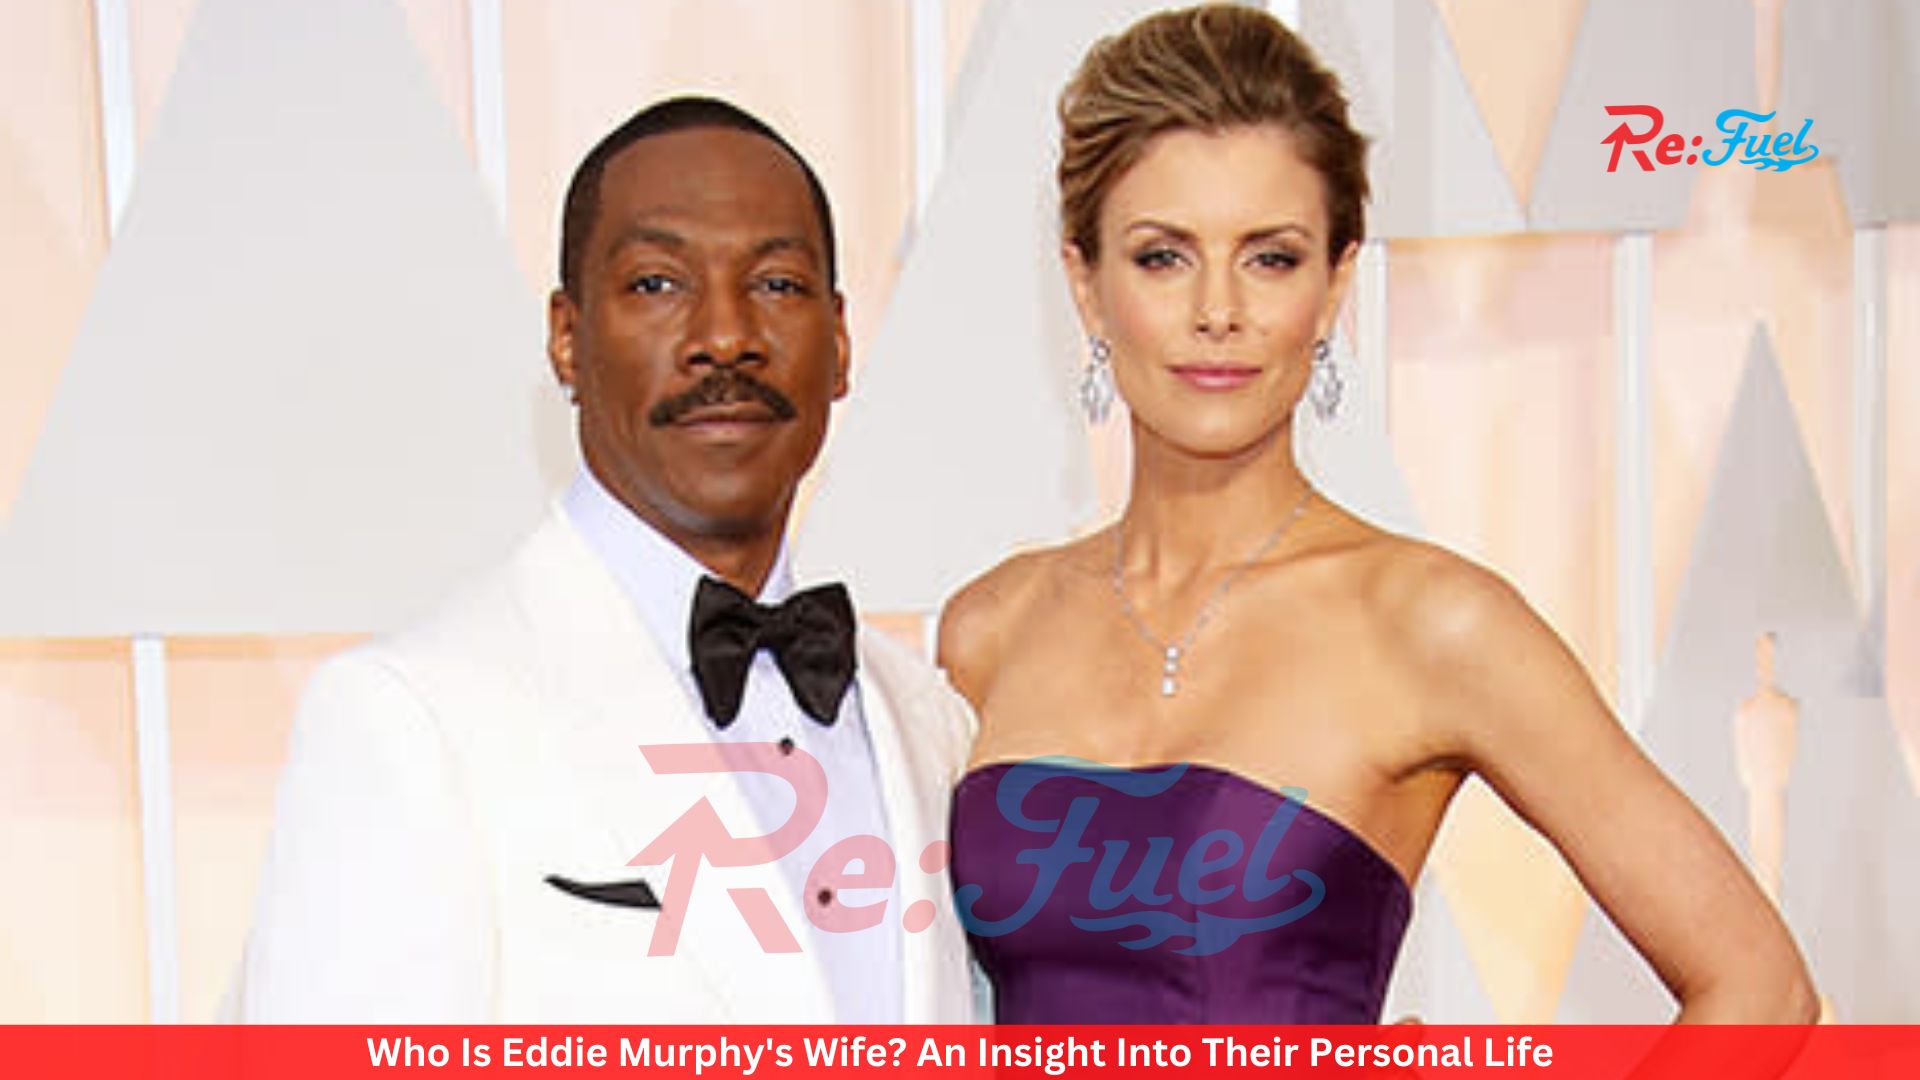 Who Is Eddie Murphy's Wife? An Insight Into Their Personal Life